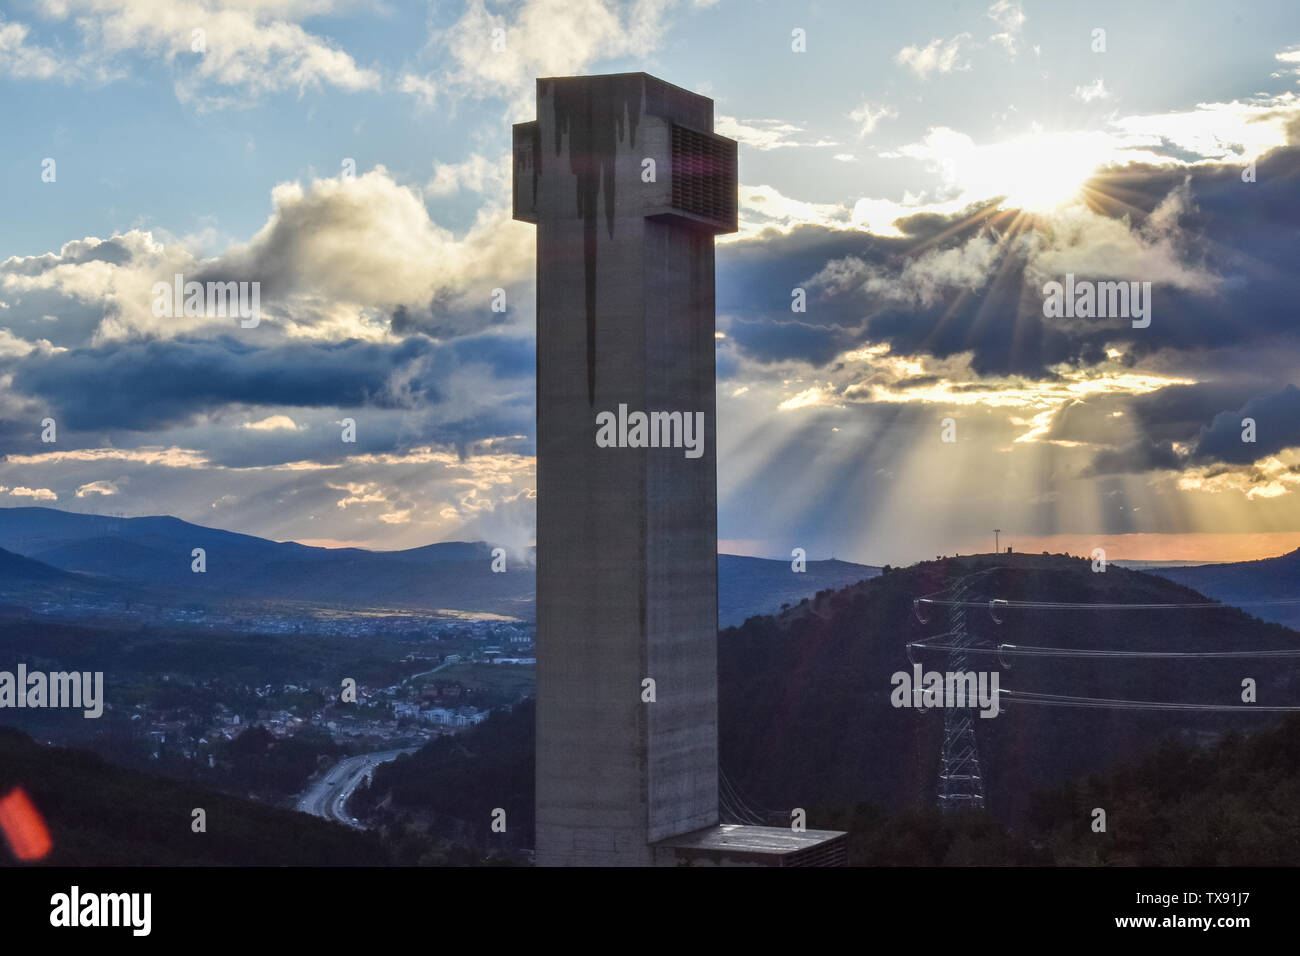 Tunnel ventilation tower in highway at dusk. Madrid, Spain Stock Photo